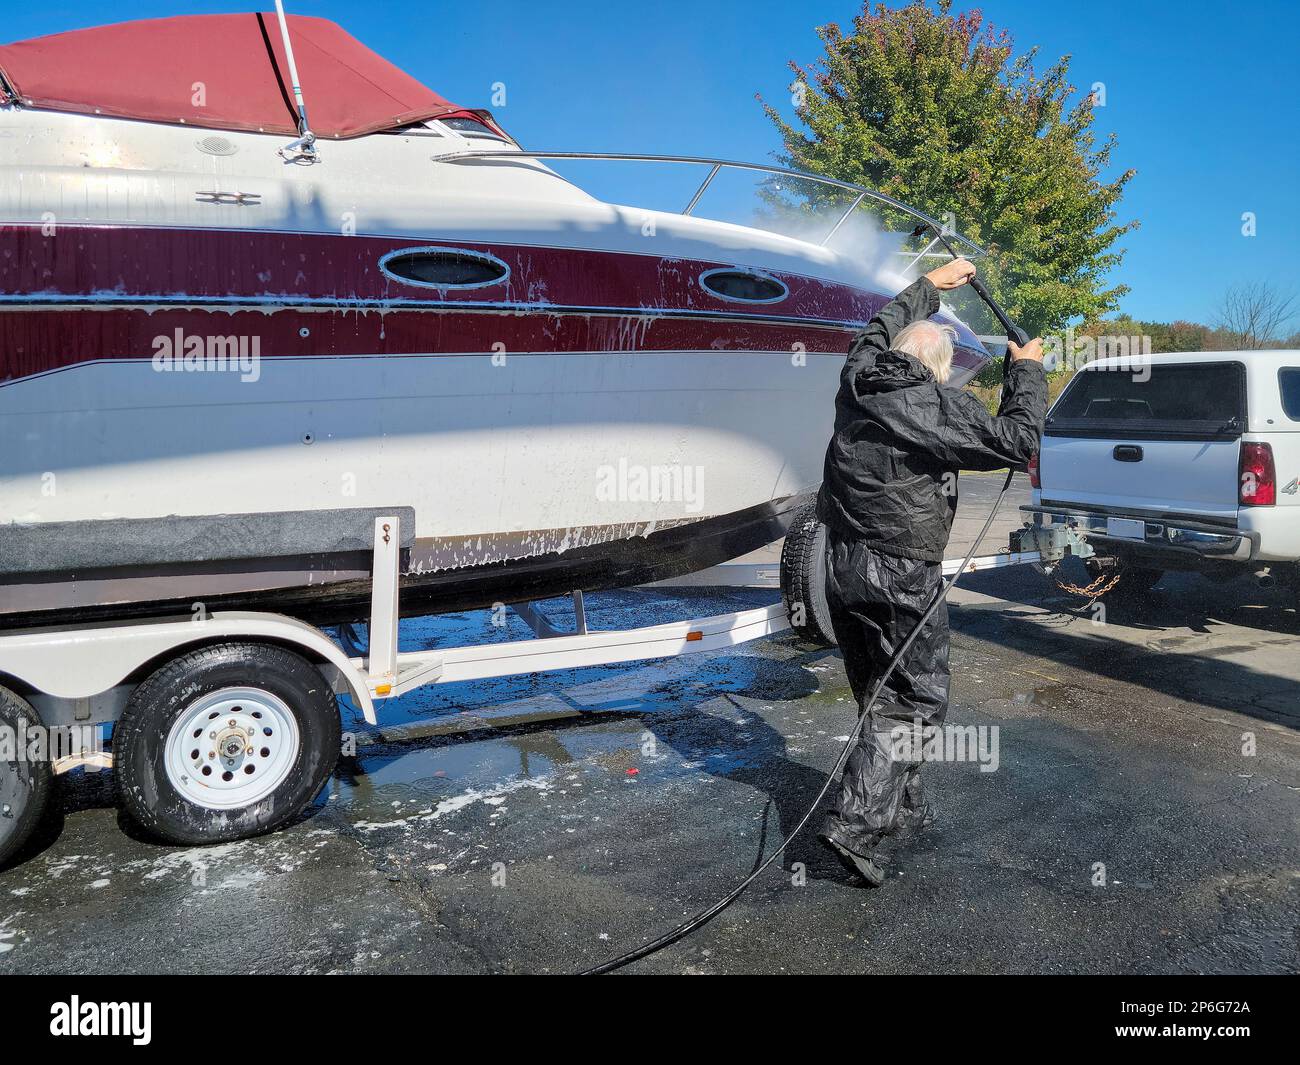 Caucasian man power washing a power boat on a trailer Stock Photo